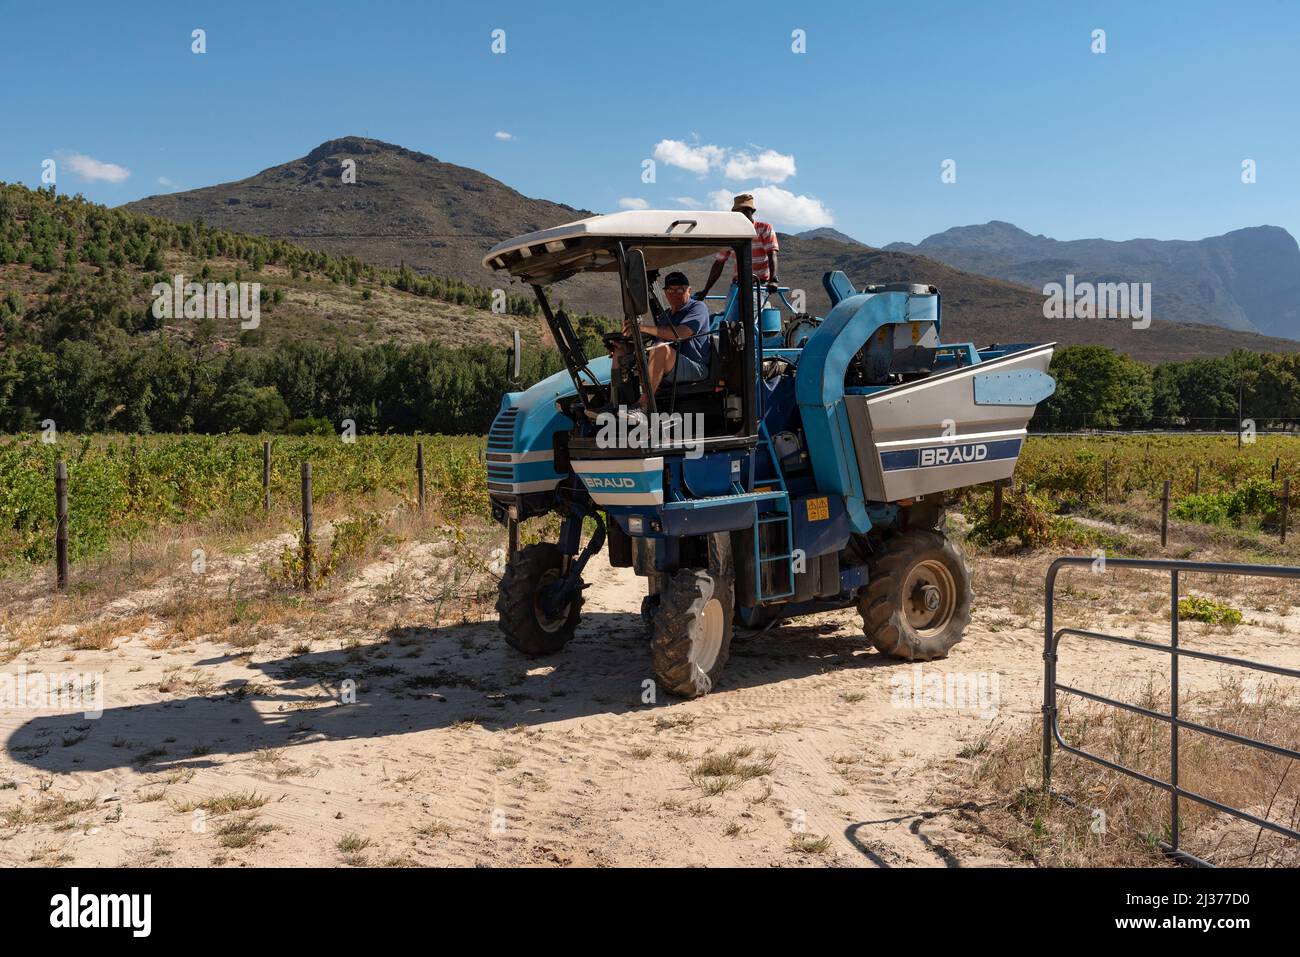 Franschhoek Western Cape, South Africa. 2022. A mechanical grape harvester machine on a small vineyard in the Franschhoek valley. Cape winelands regi Stock Photo